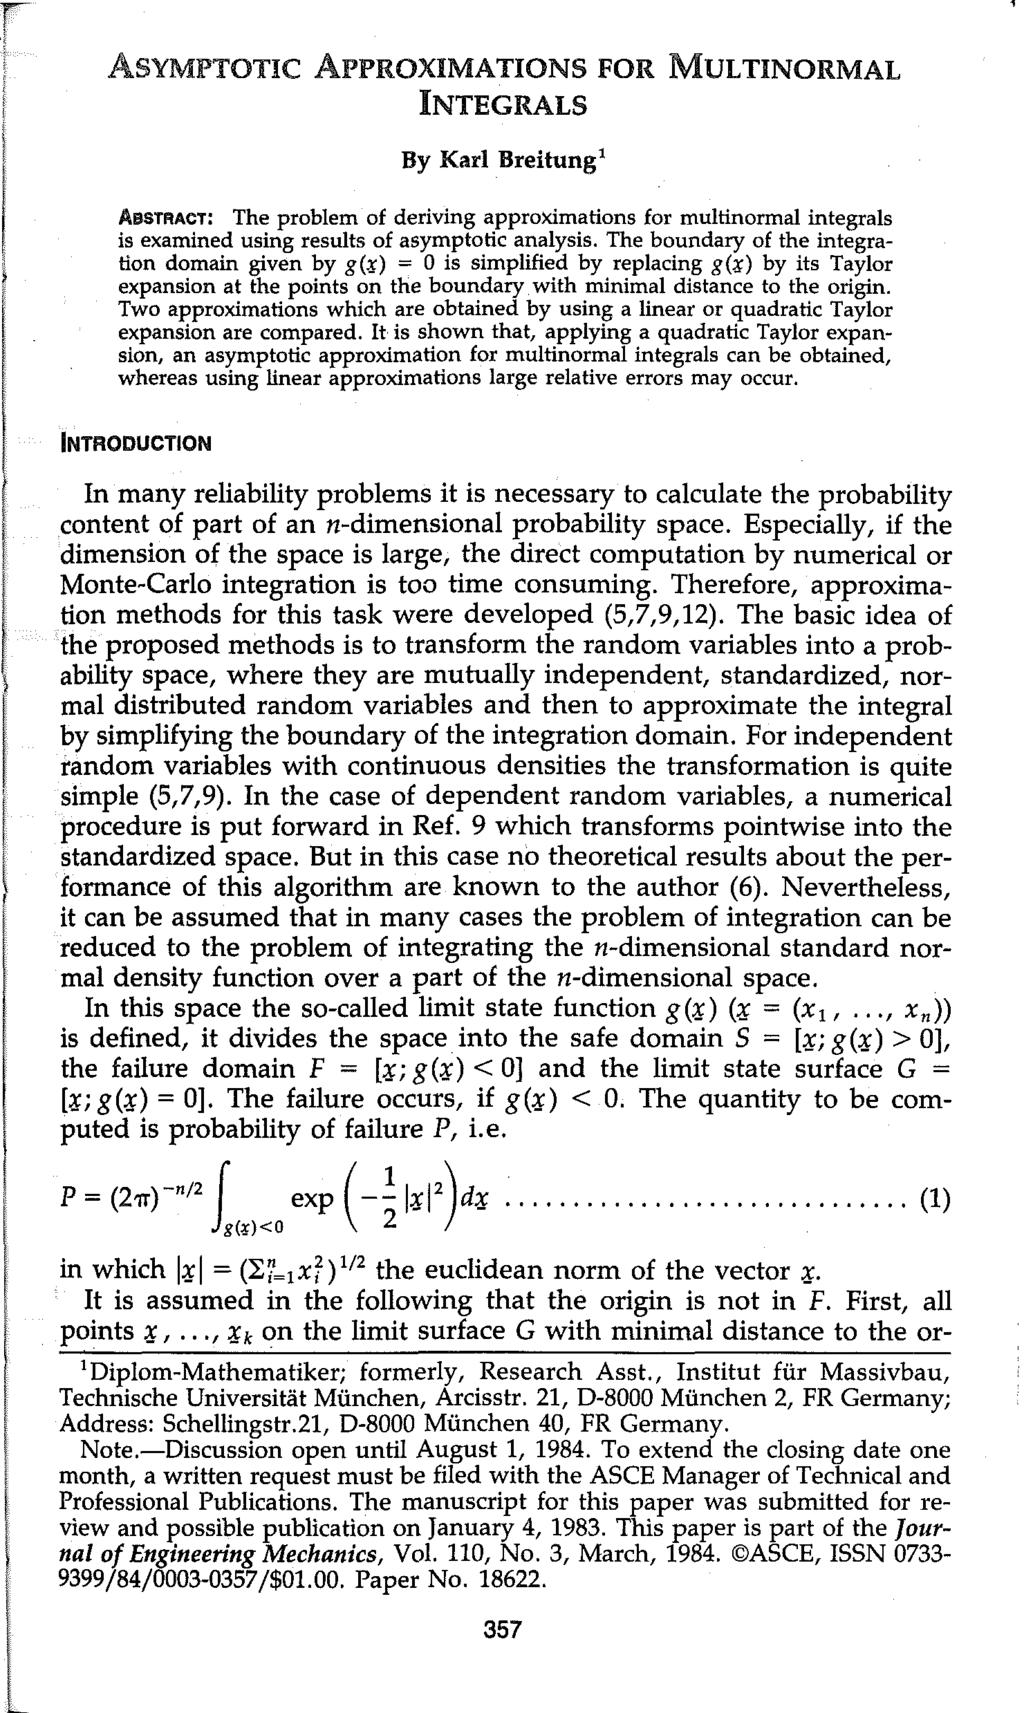 ASYMPTOTIC APPROXIMATIONS FOR MULTINORMAL INTEGRALS By Karl Breitung 1 Downloaded from ascelibrary.org by GEORGE MASON UNIVERSITY on 07/16/13. Copyright ASCE.